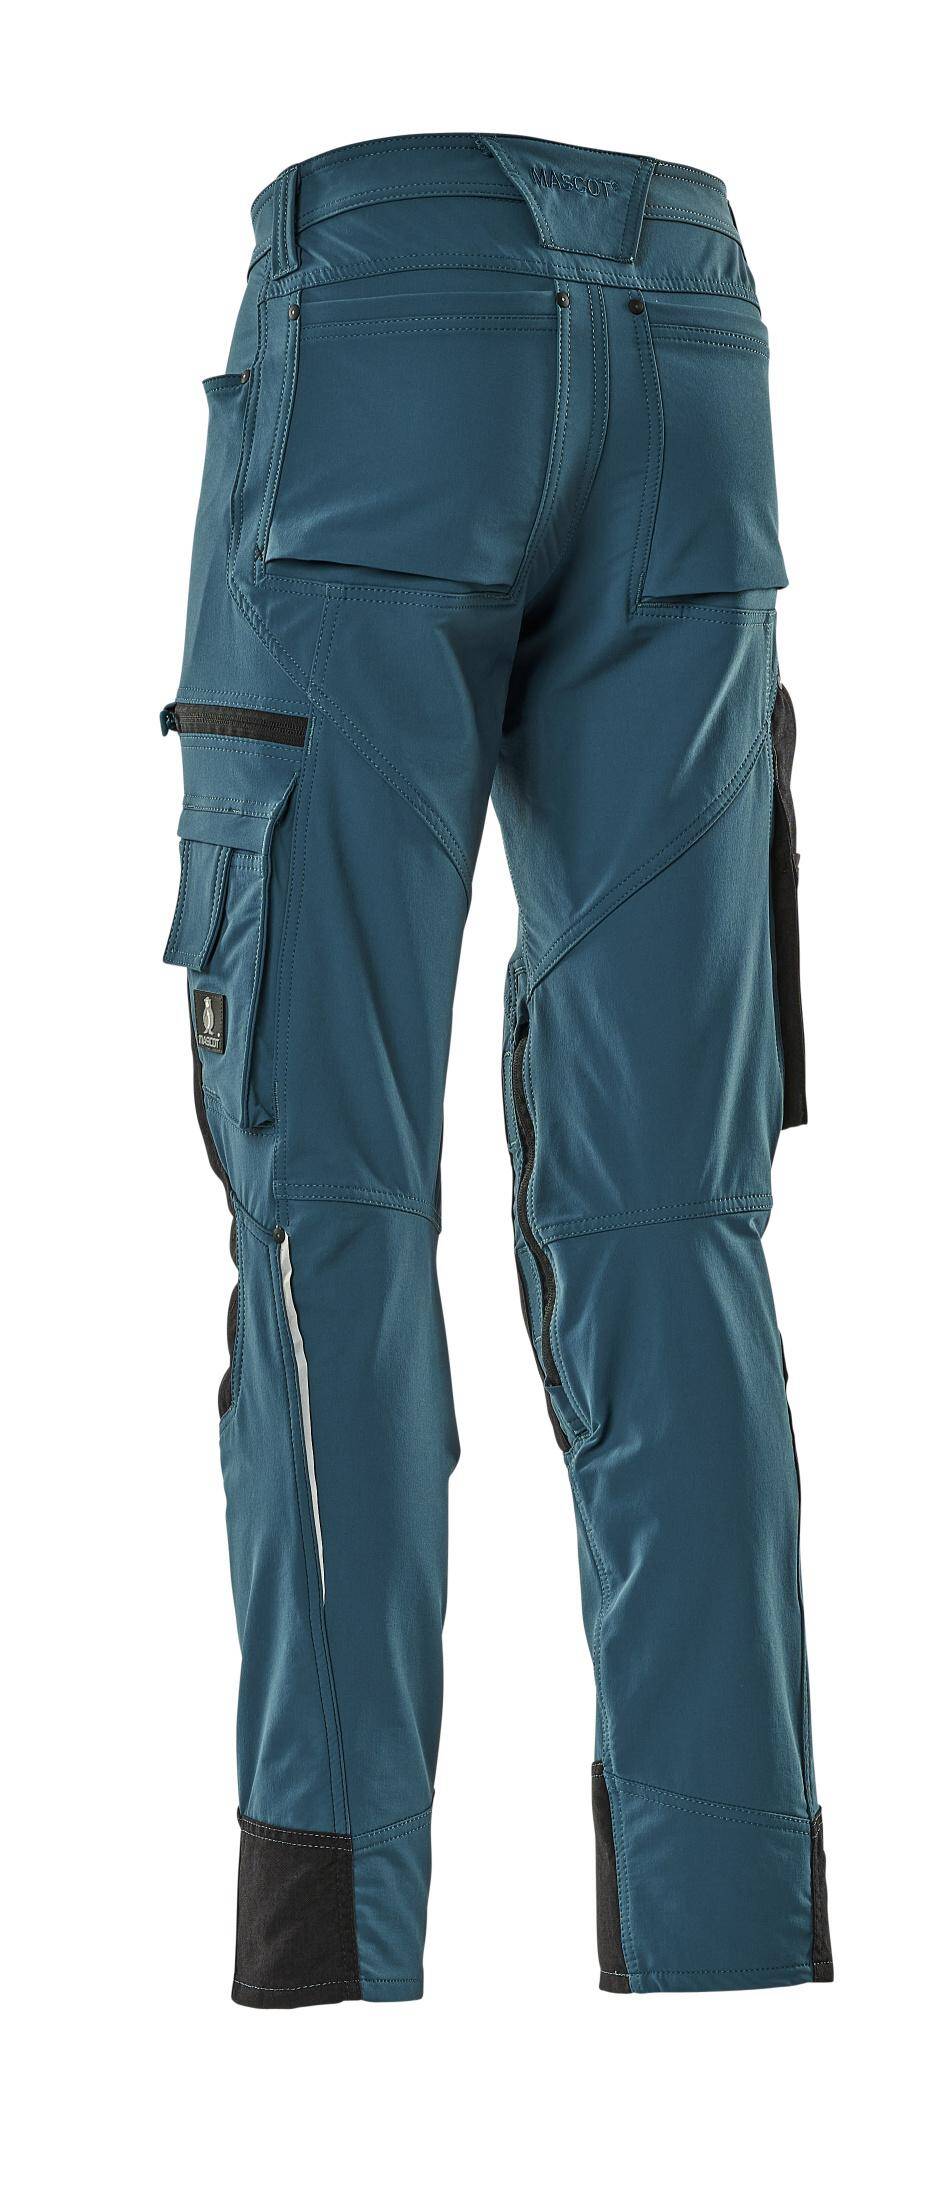 Trousers with kneepad pockets Advanced blue